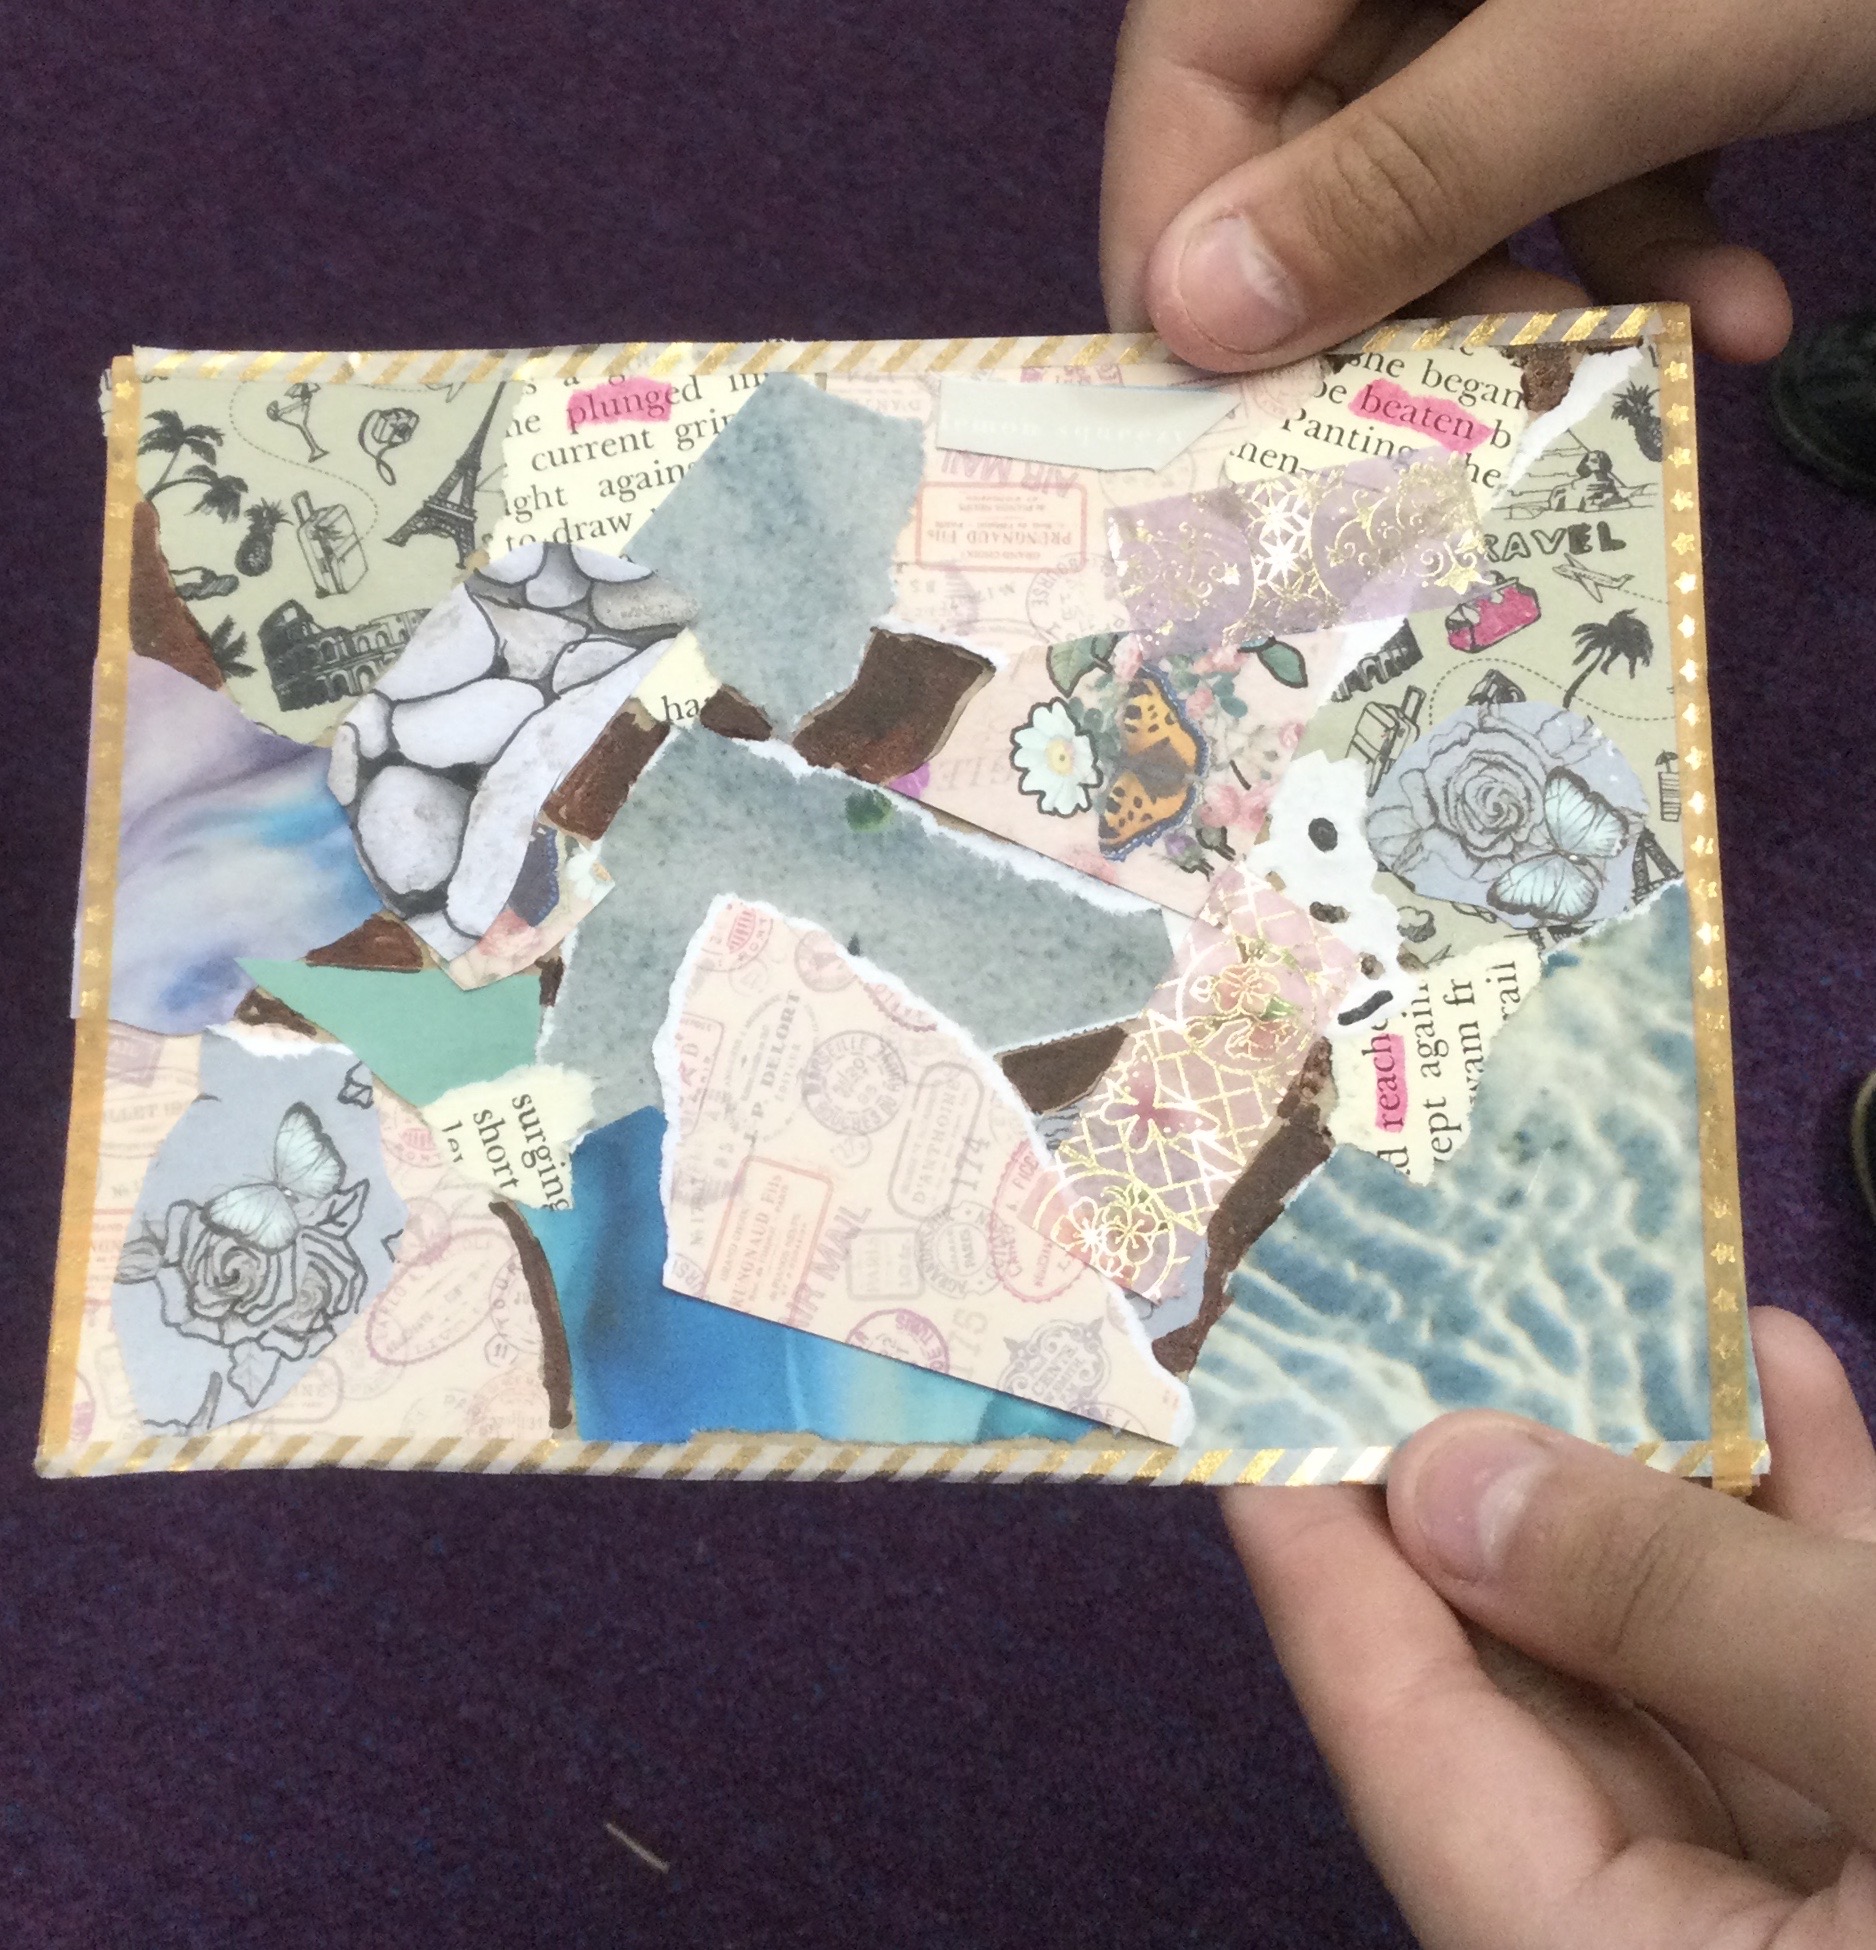 A pair of hands holding a postcard, collaged with a variety of papers in pinks and blues, some with images of palm trees and bordered with a thin gold tape